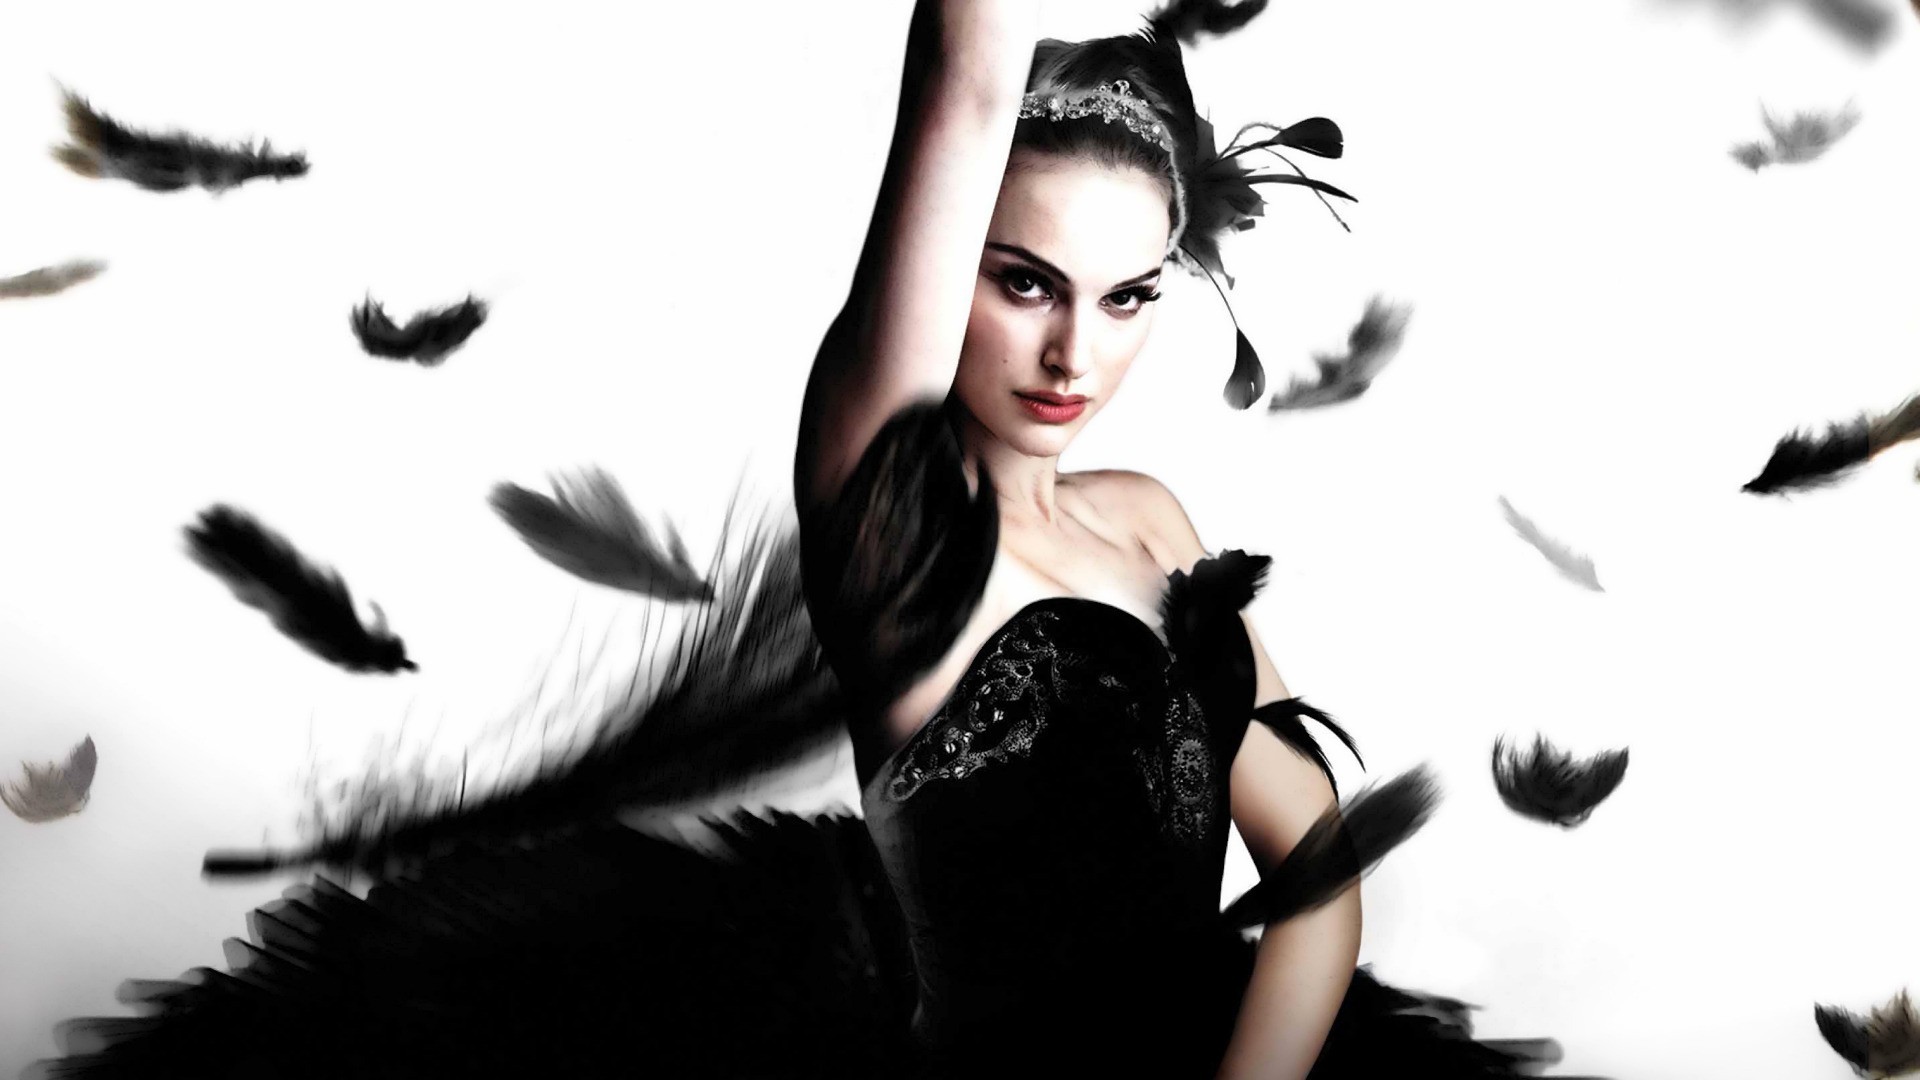 People 1920x1080 movies Natalie Portman Black Swan feathers women black white smoky eyes actress celebrity simple background white background arms up ballet